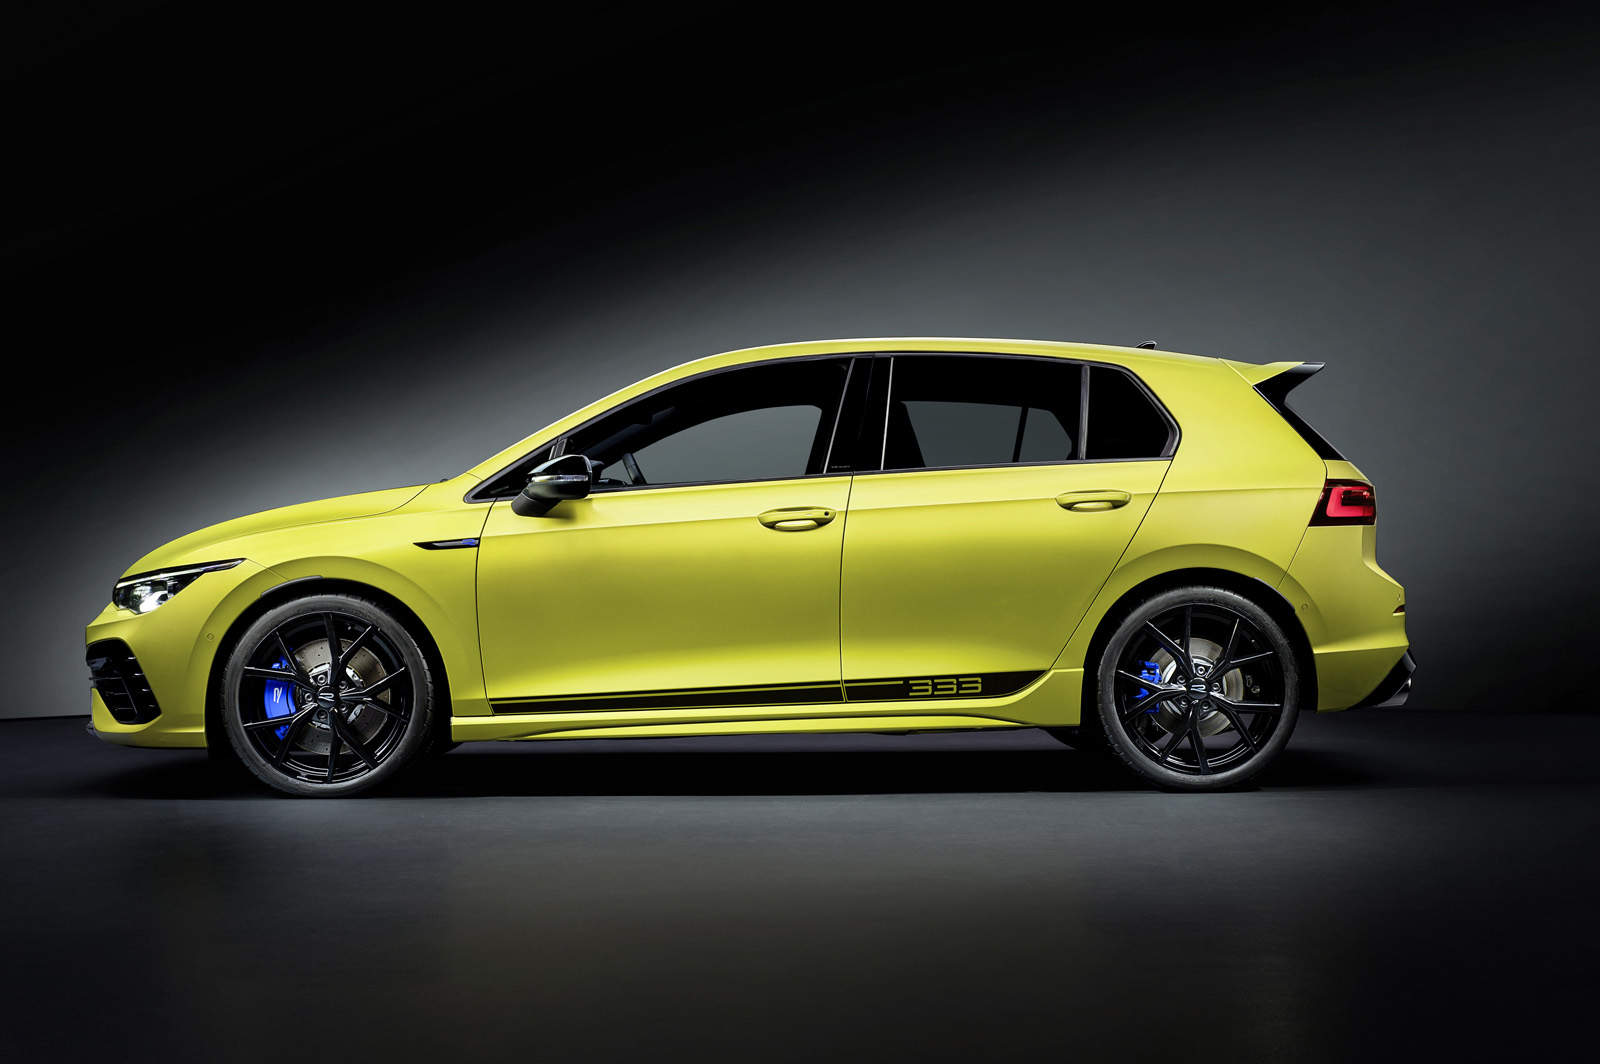 2022 Volkswagen Golf R Revealed As The Most Powerful Golf Ever